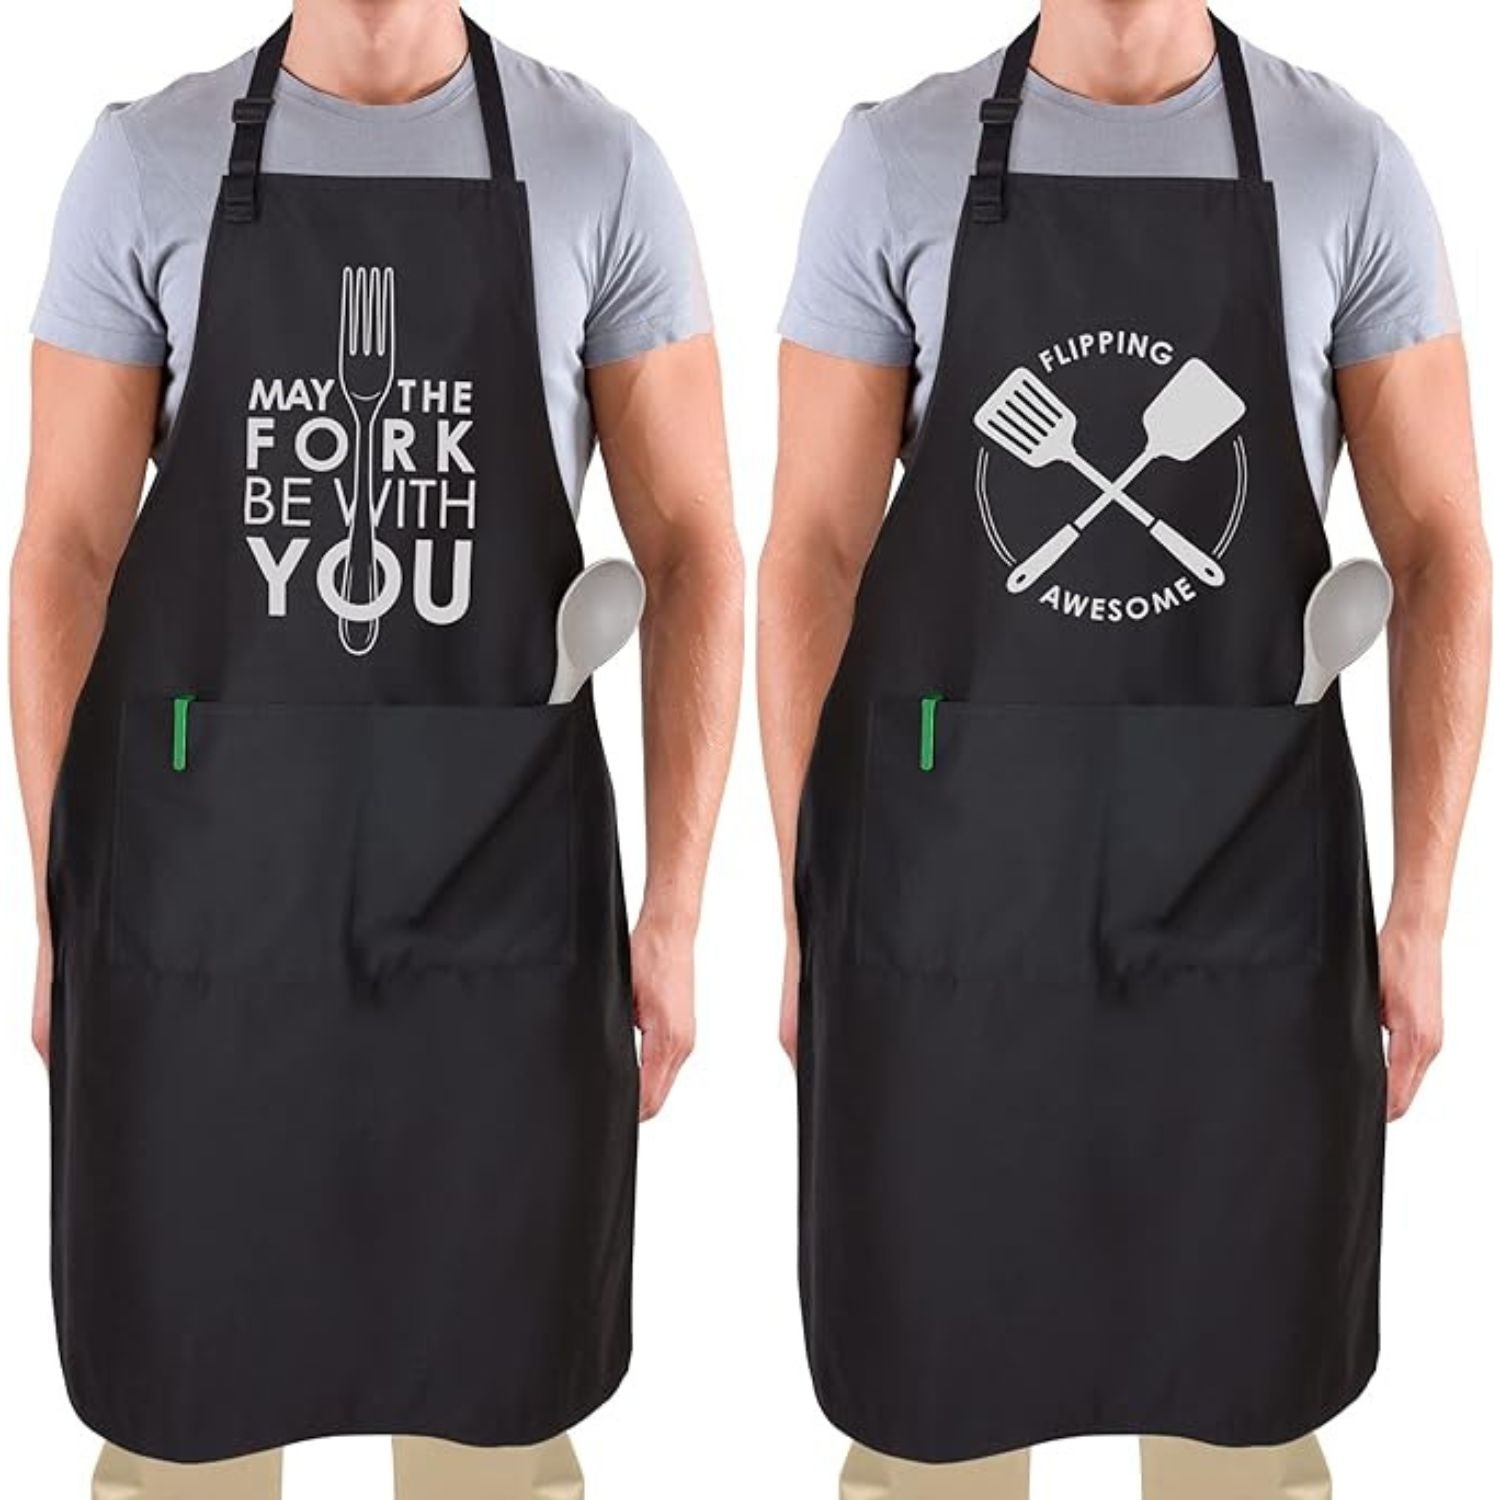 Funny Aprons for Men, Women & Couples